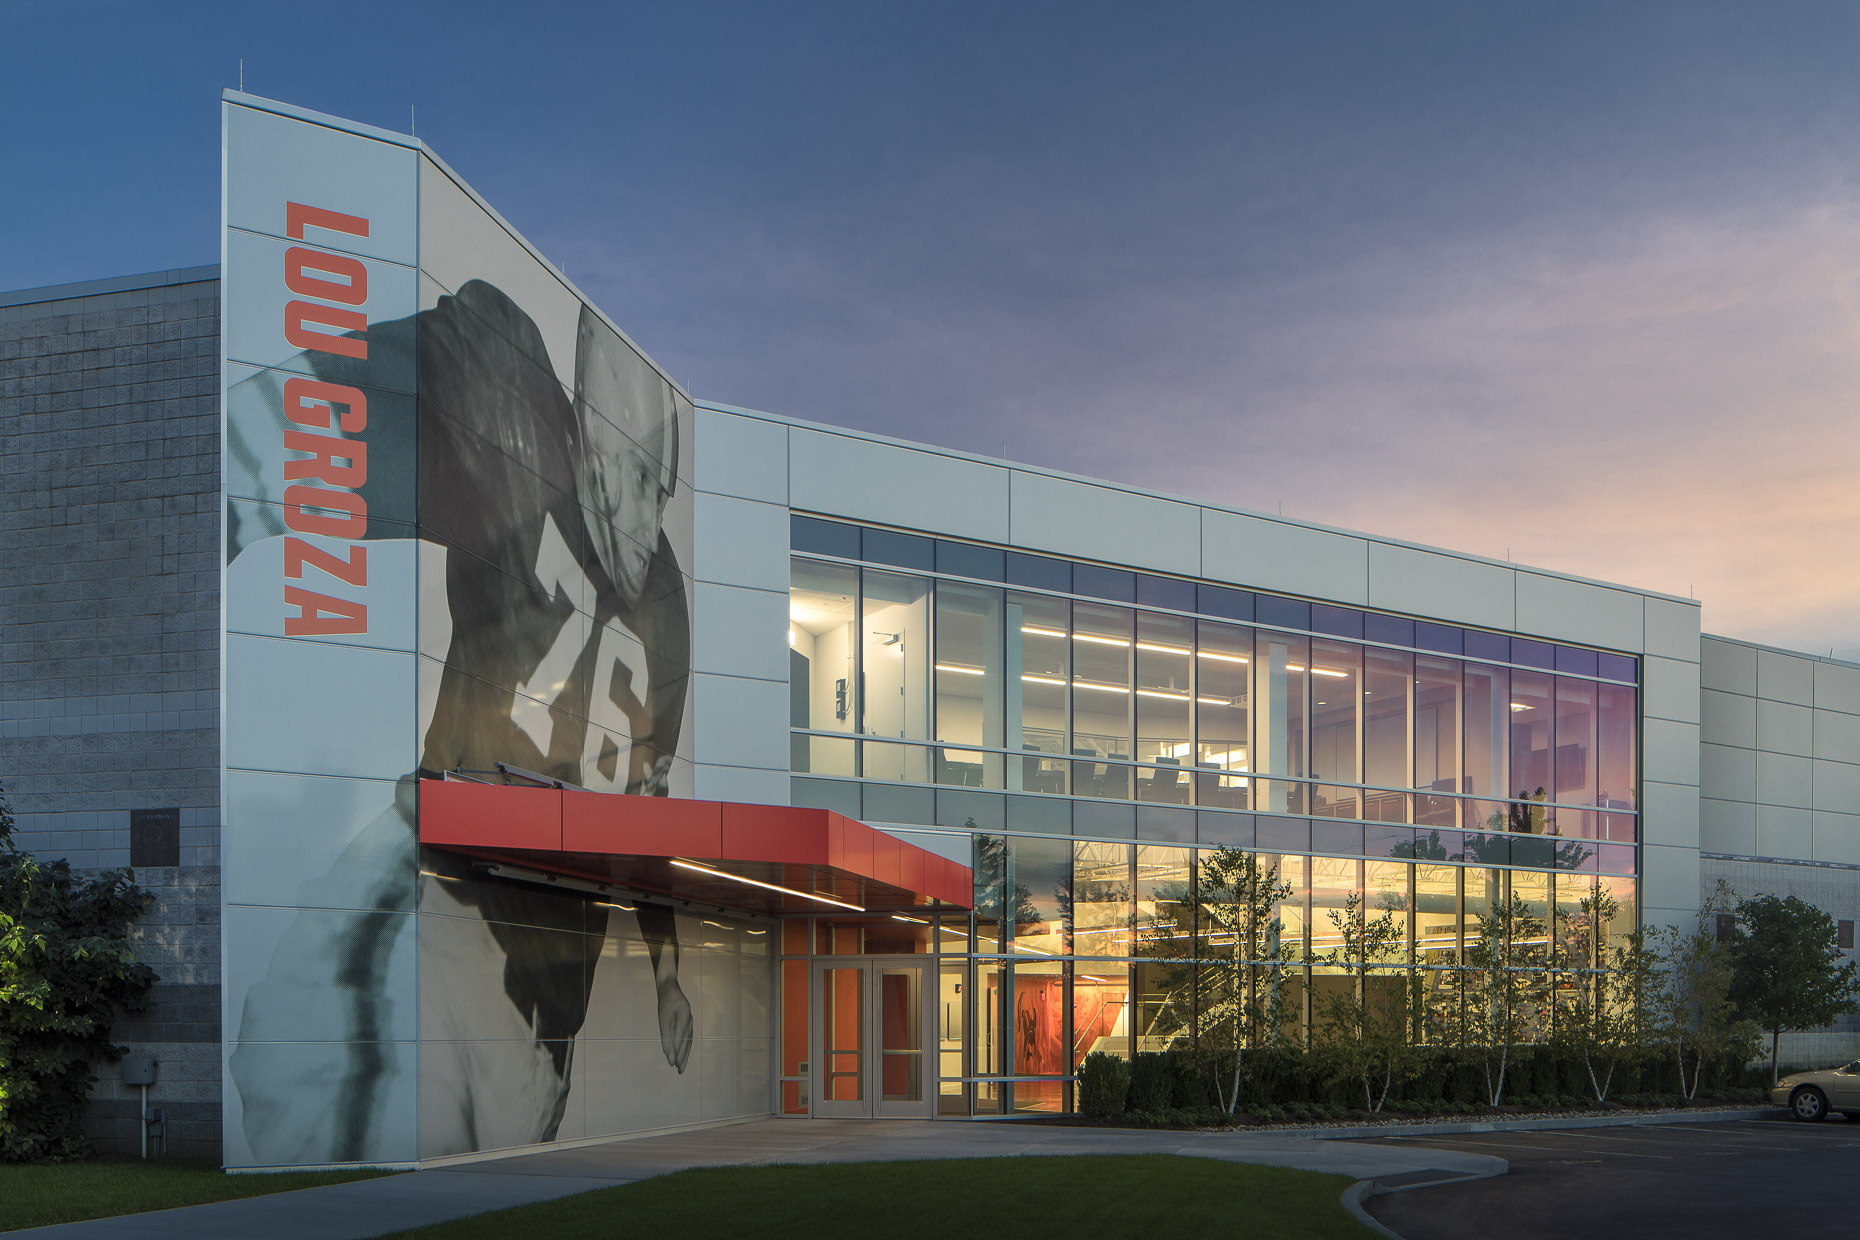 Cleveland Browns Headquarters Training Facility by Vocon photographed by Brad Feinknopf based in Columbus, Ohio